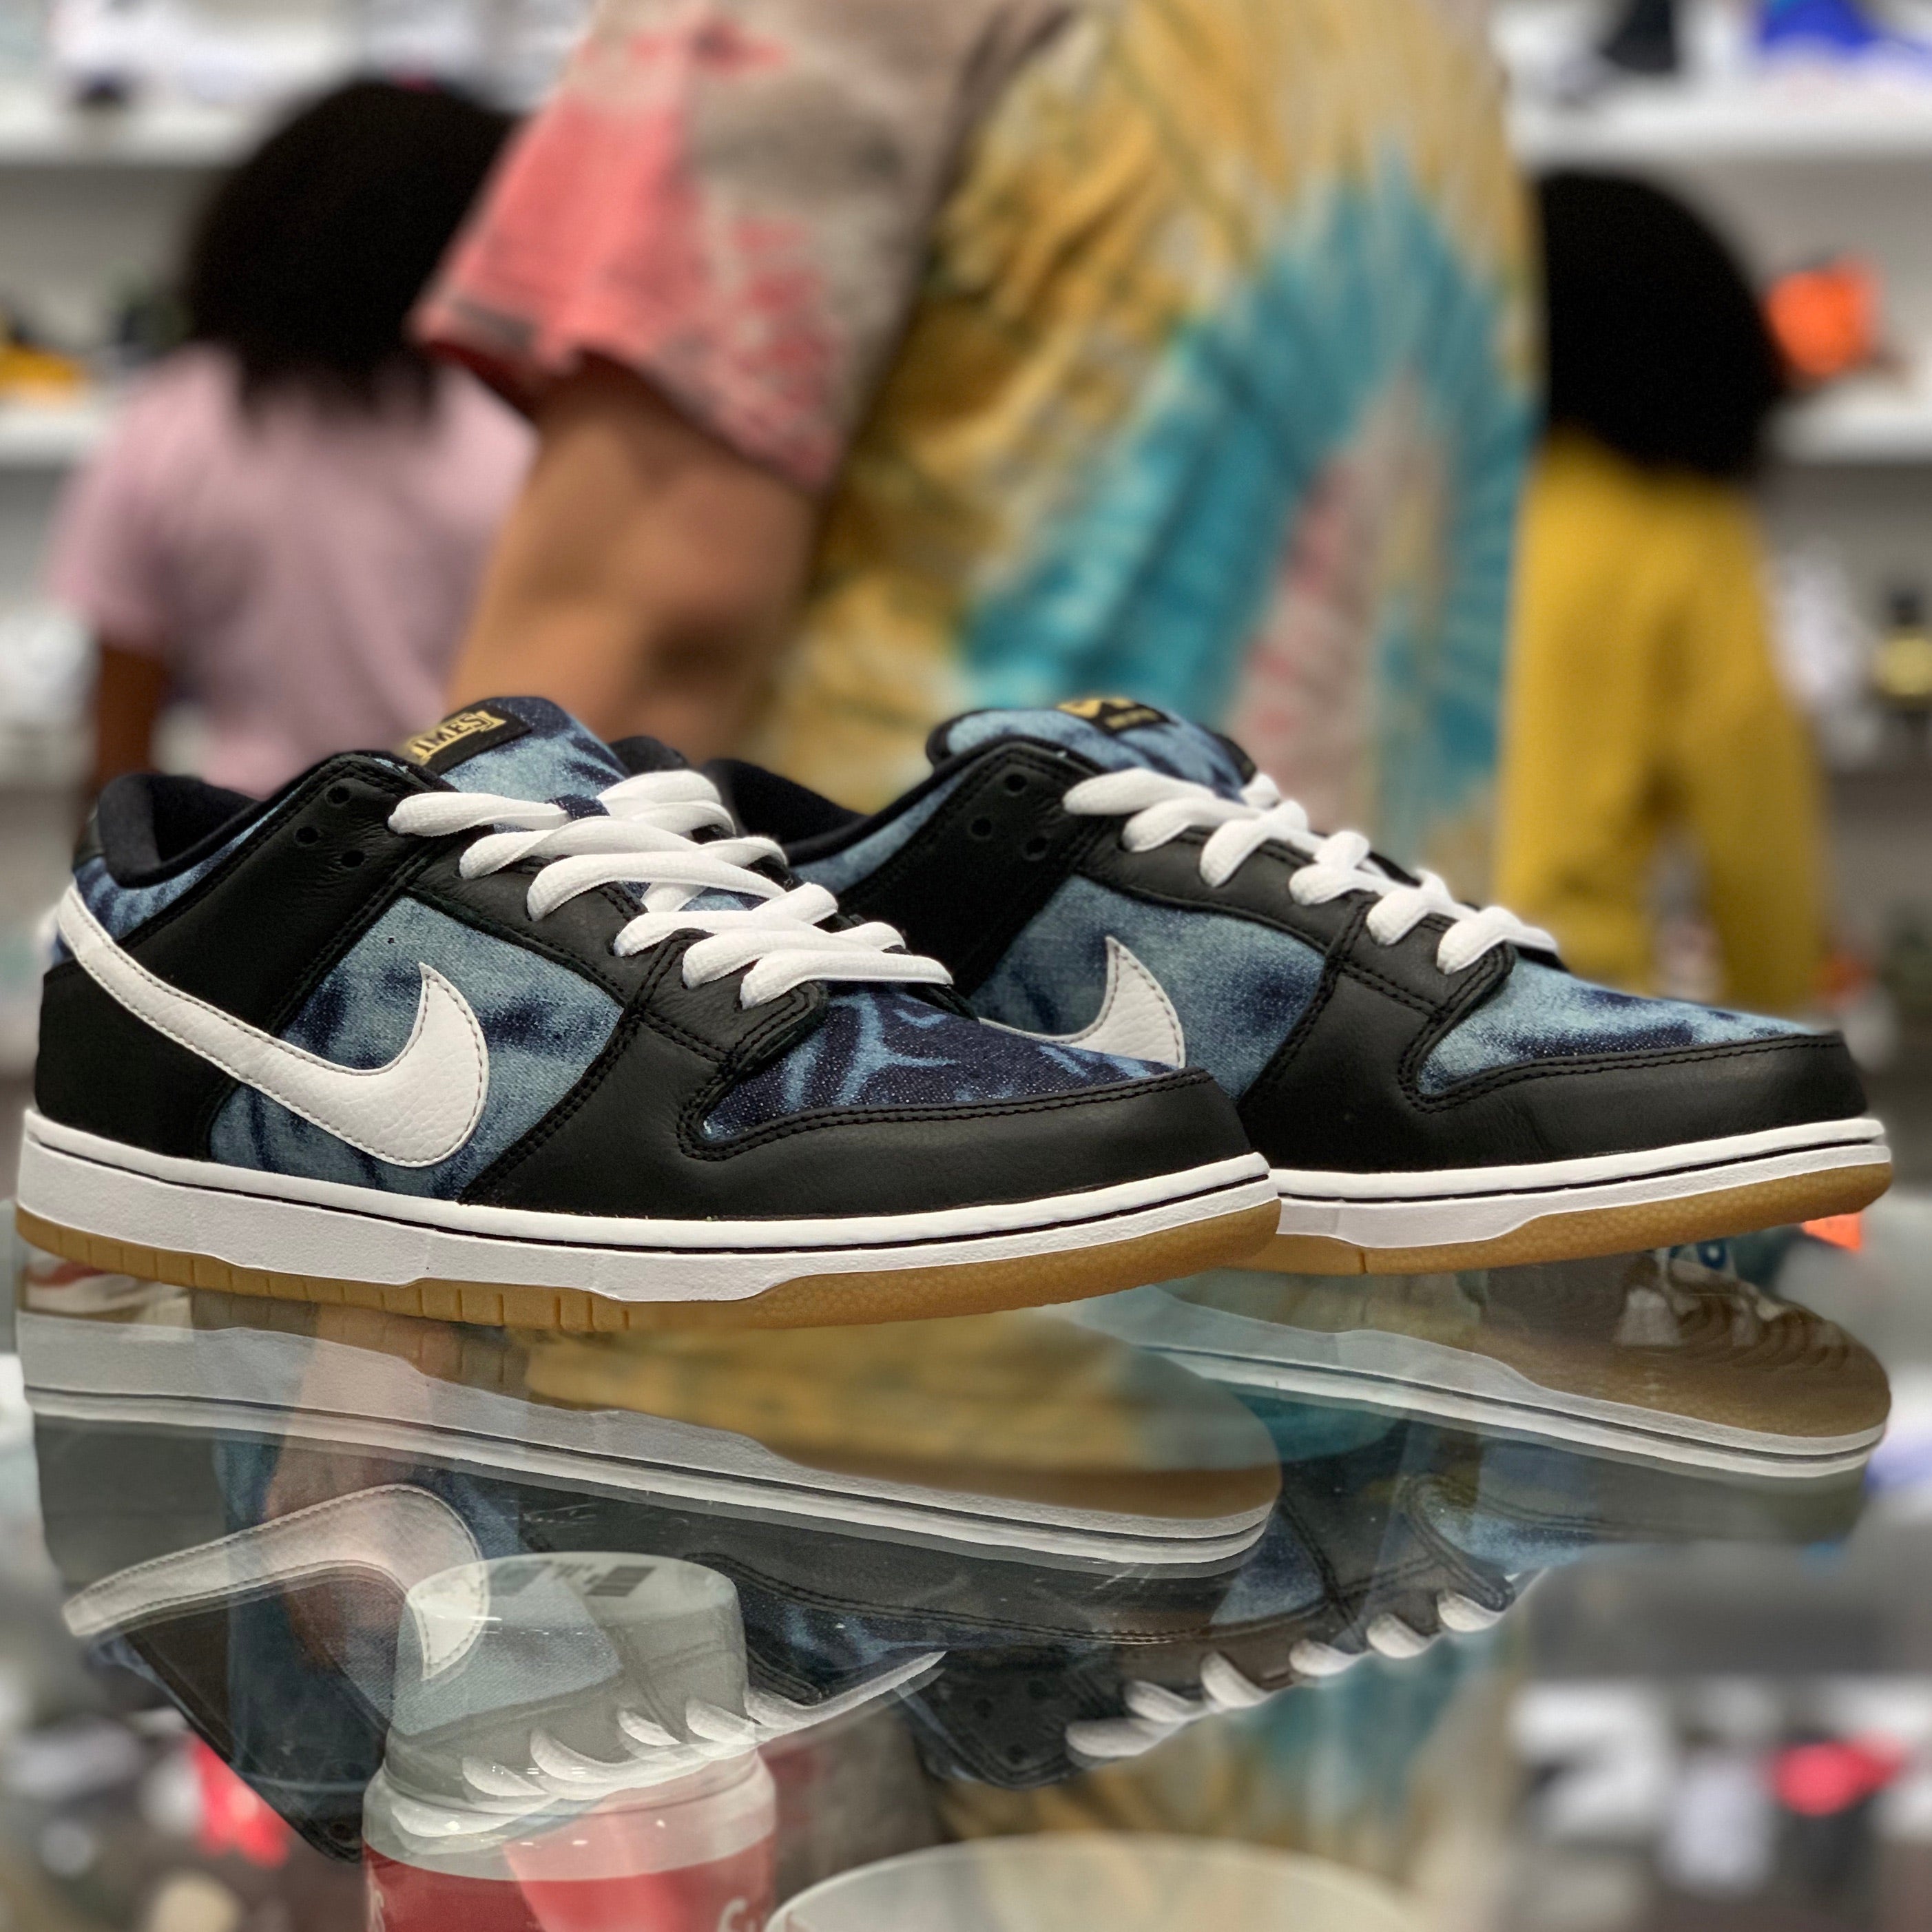 Nike Dunk SB Low “Fast Time”   Request